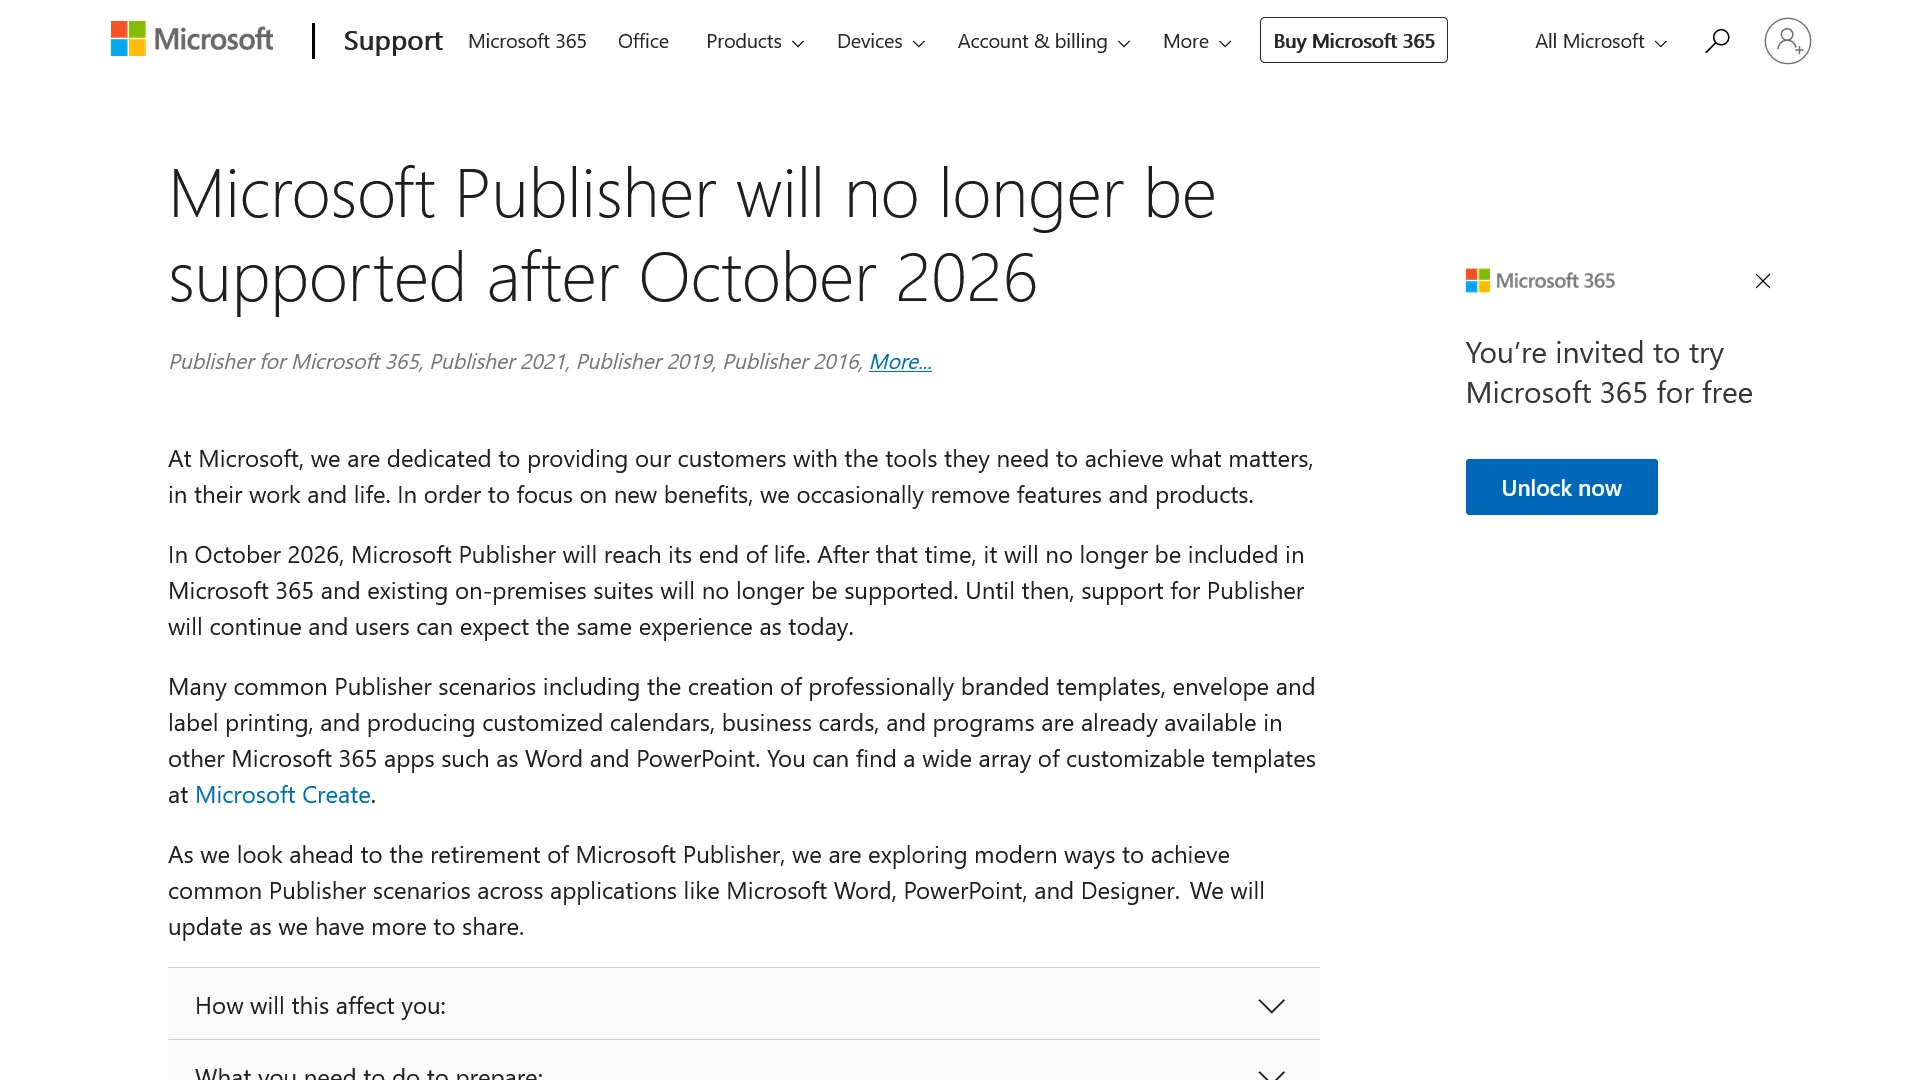 Microsoft Publisher will no longer be supported after October 2026